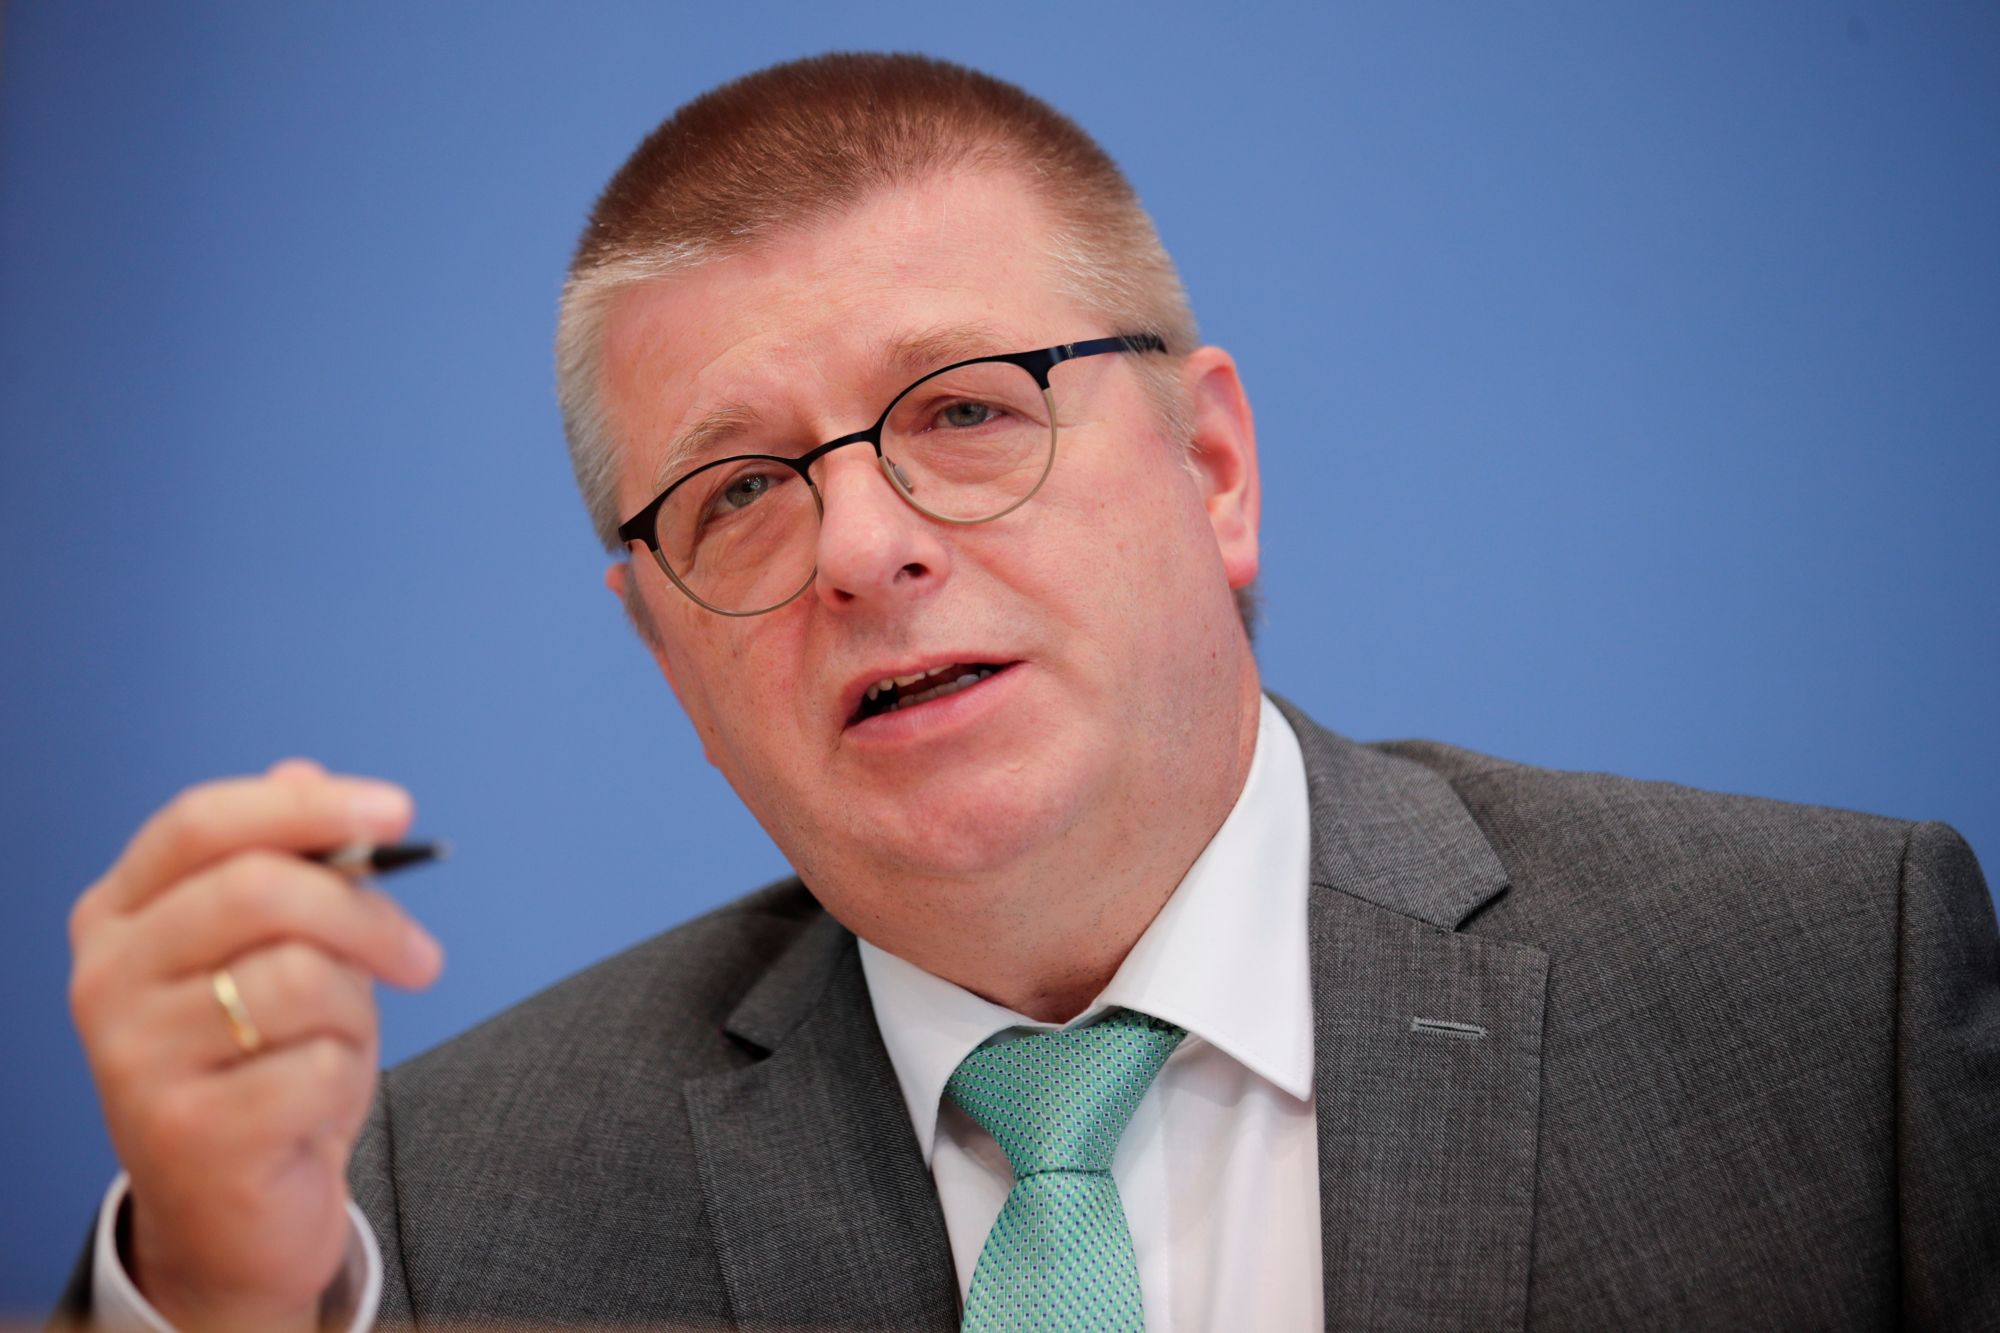 President of the Federal Office for the Protection of the Constitution Thomas Haldenwang attends a news conference in Berlin